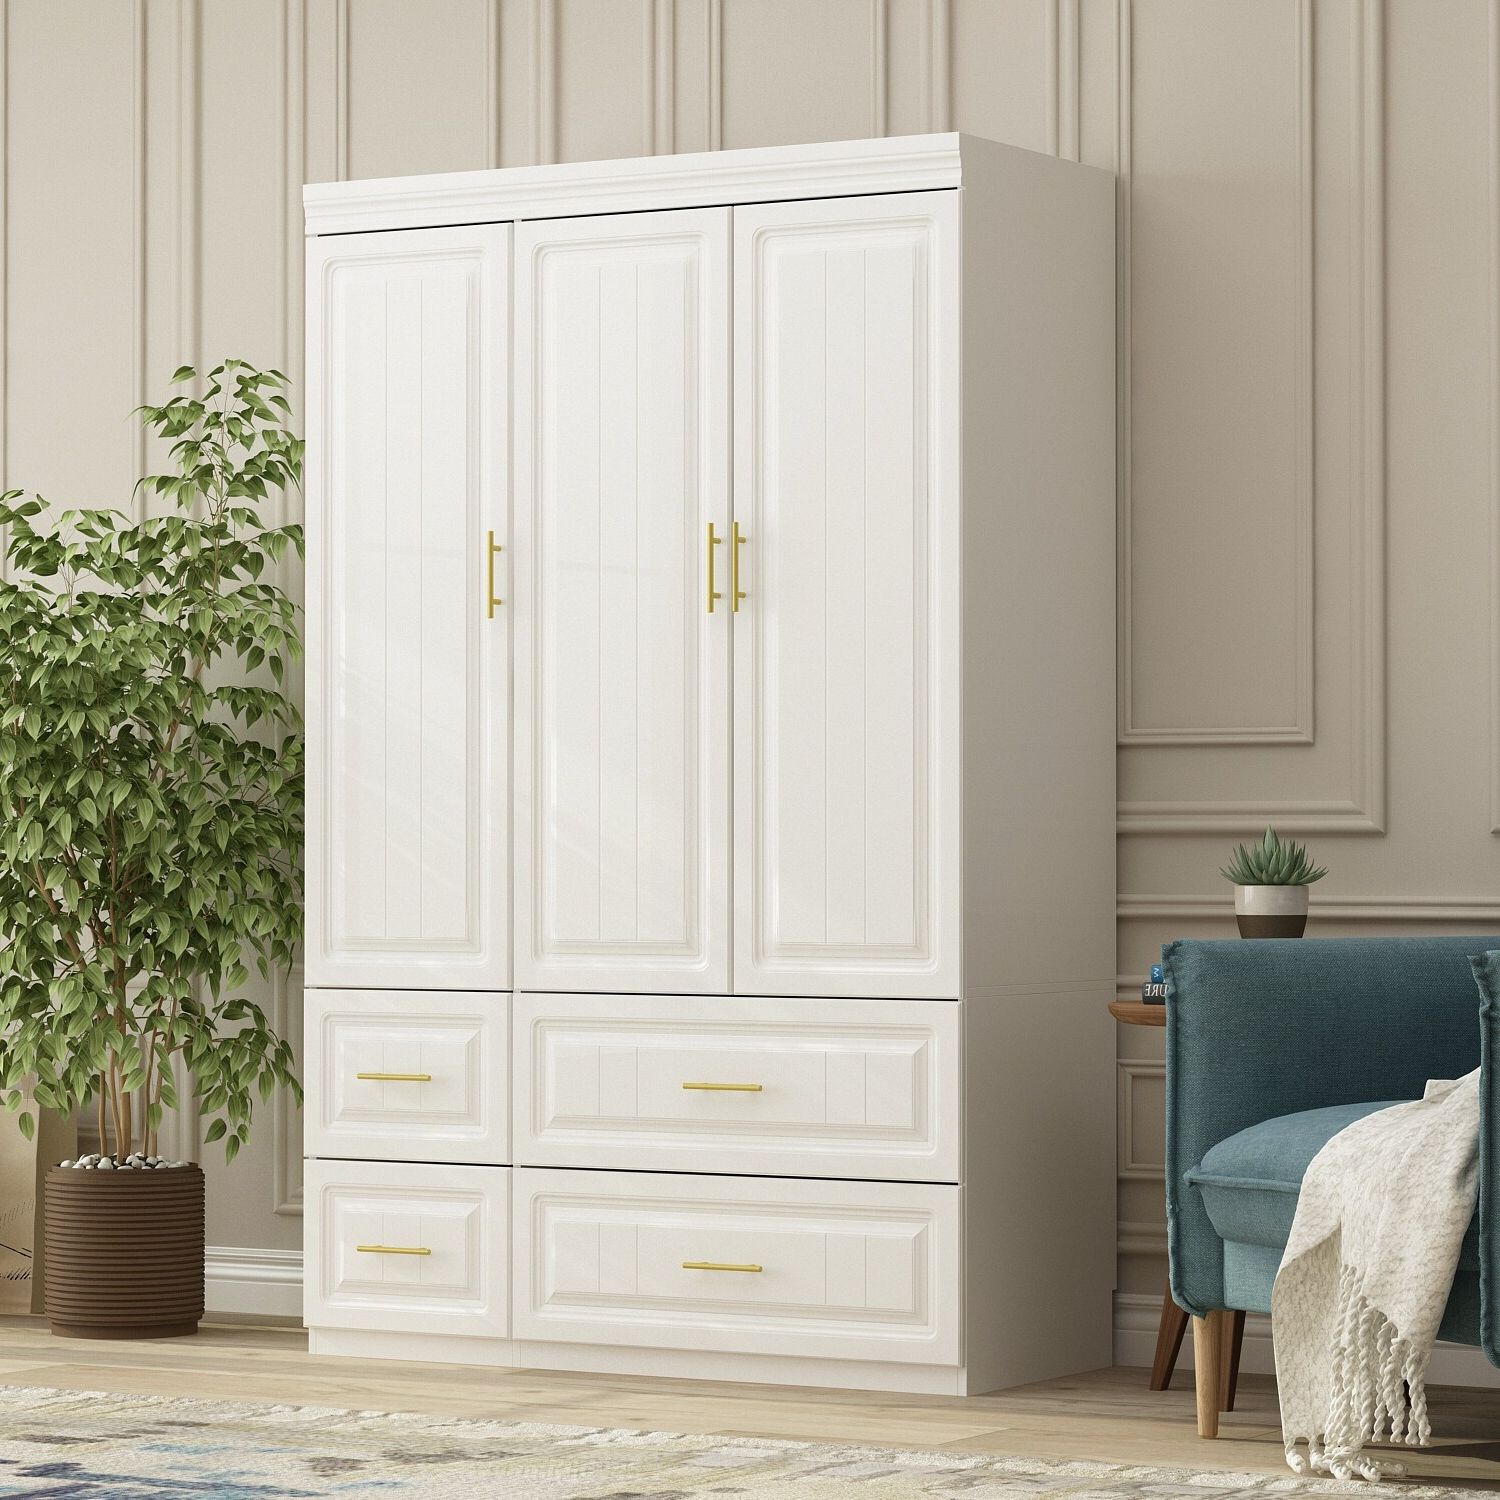 Fufu&gaga Large Armoire Combo Wardrobes Closet Storage Cabinet White – On  Sale – Bed Bath & Beyond – 36502870 Inside Wardrobes And Drawers Combo (Gallery 9 of 20)